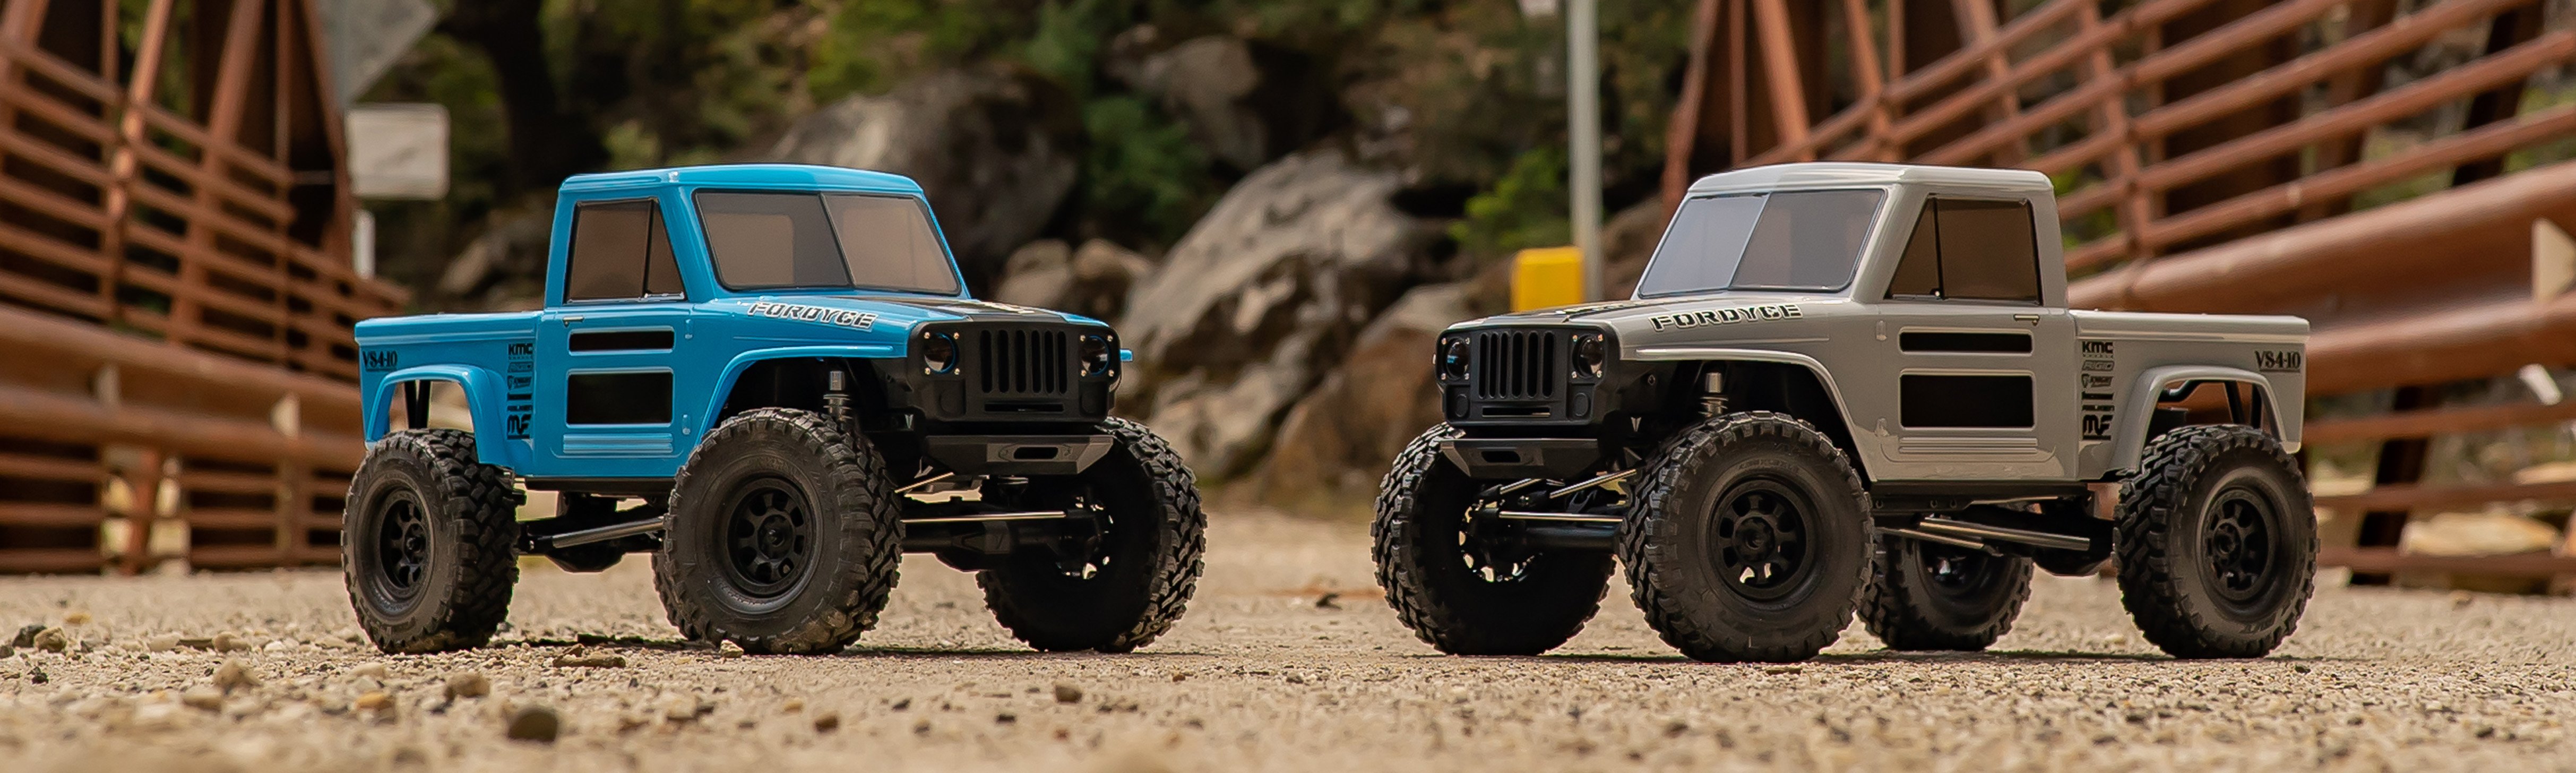 Vanquish Products VS4-10 Fordyce RTR Straight Axle Rock Crawler 